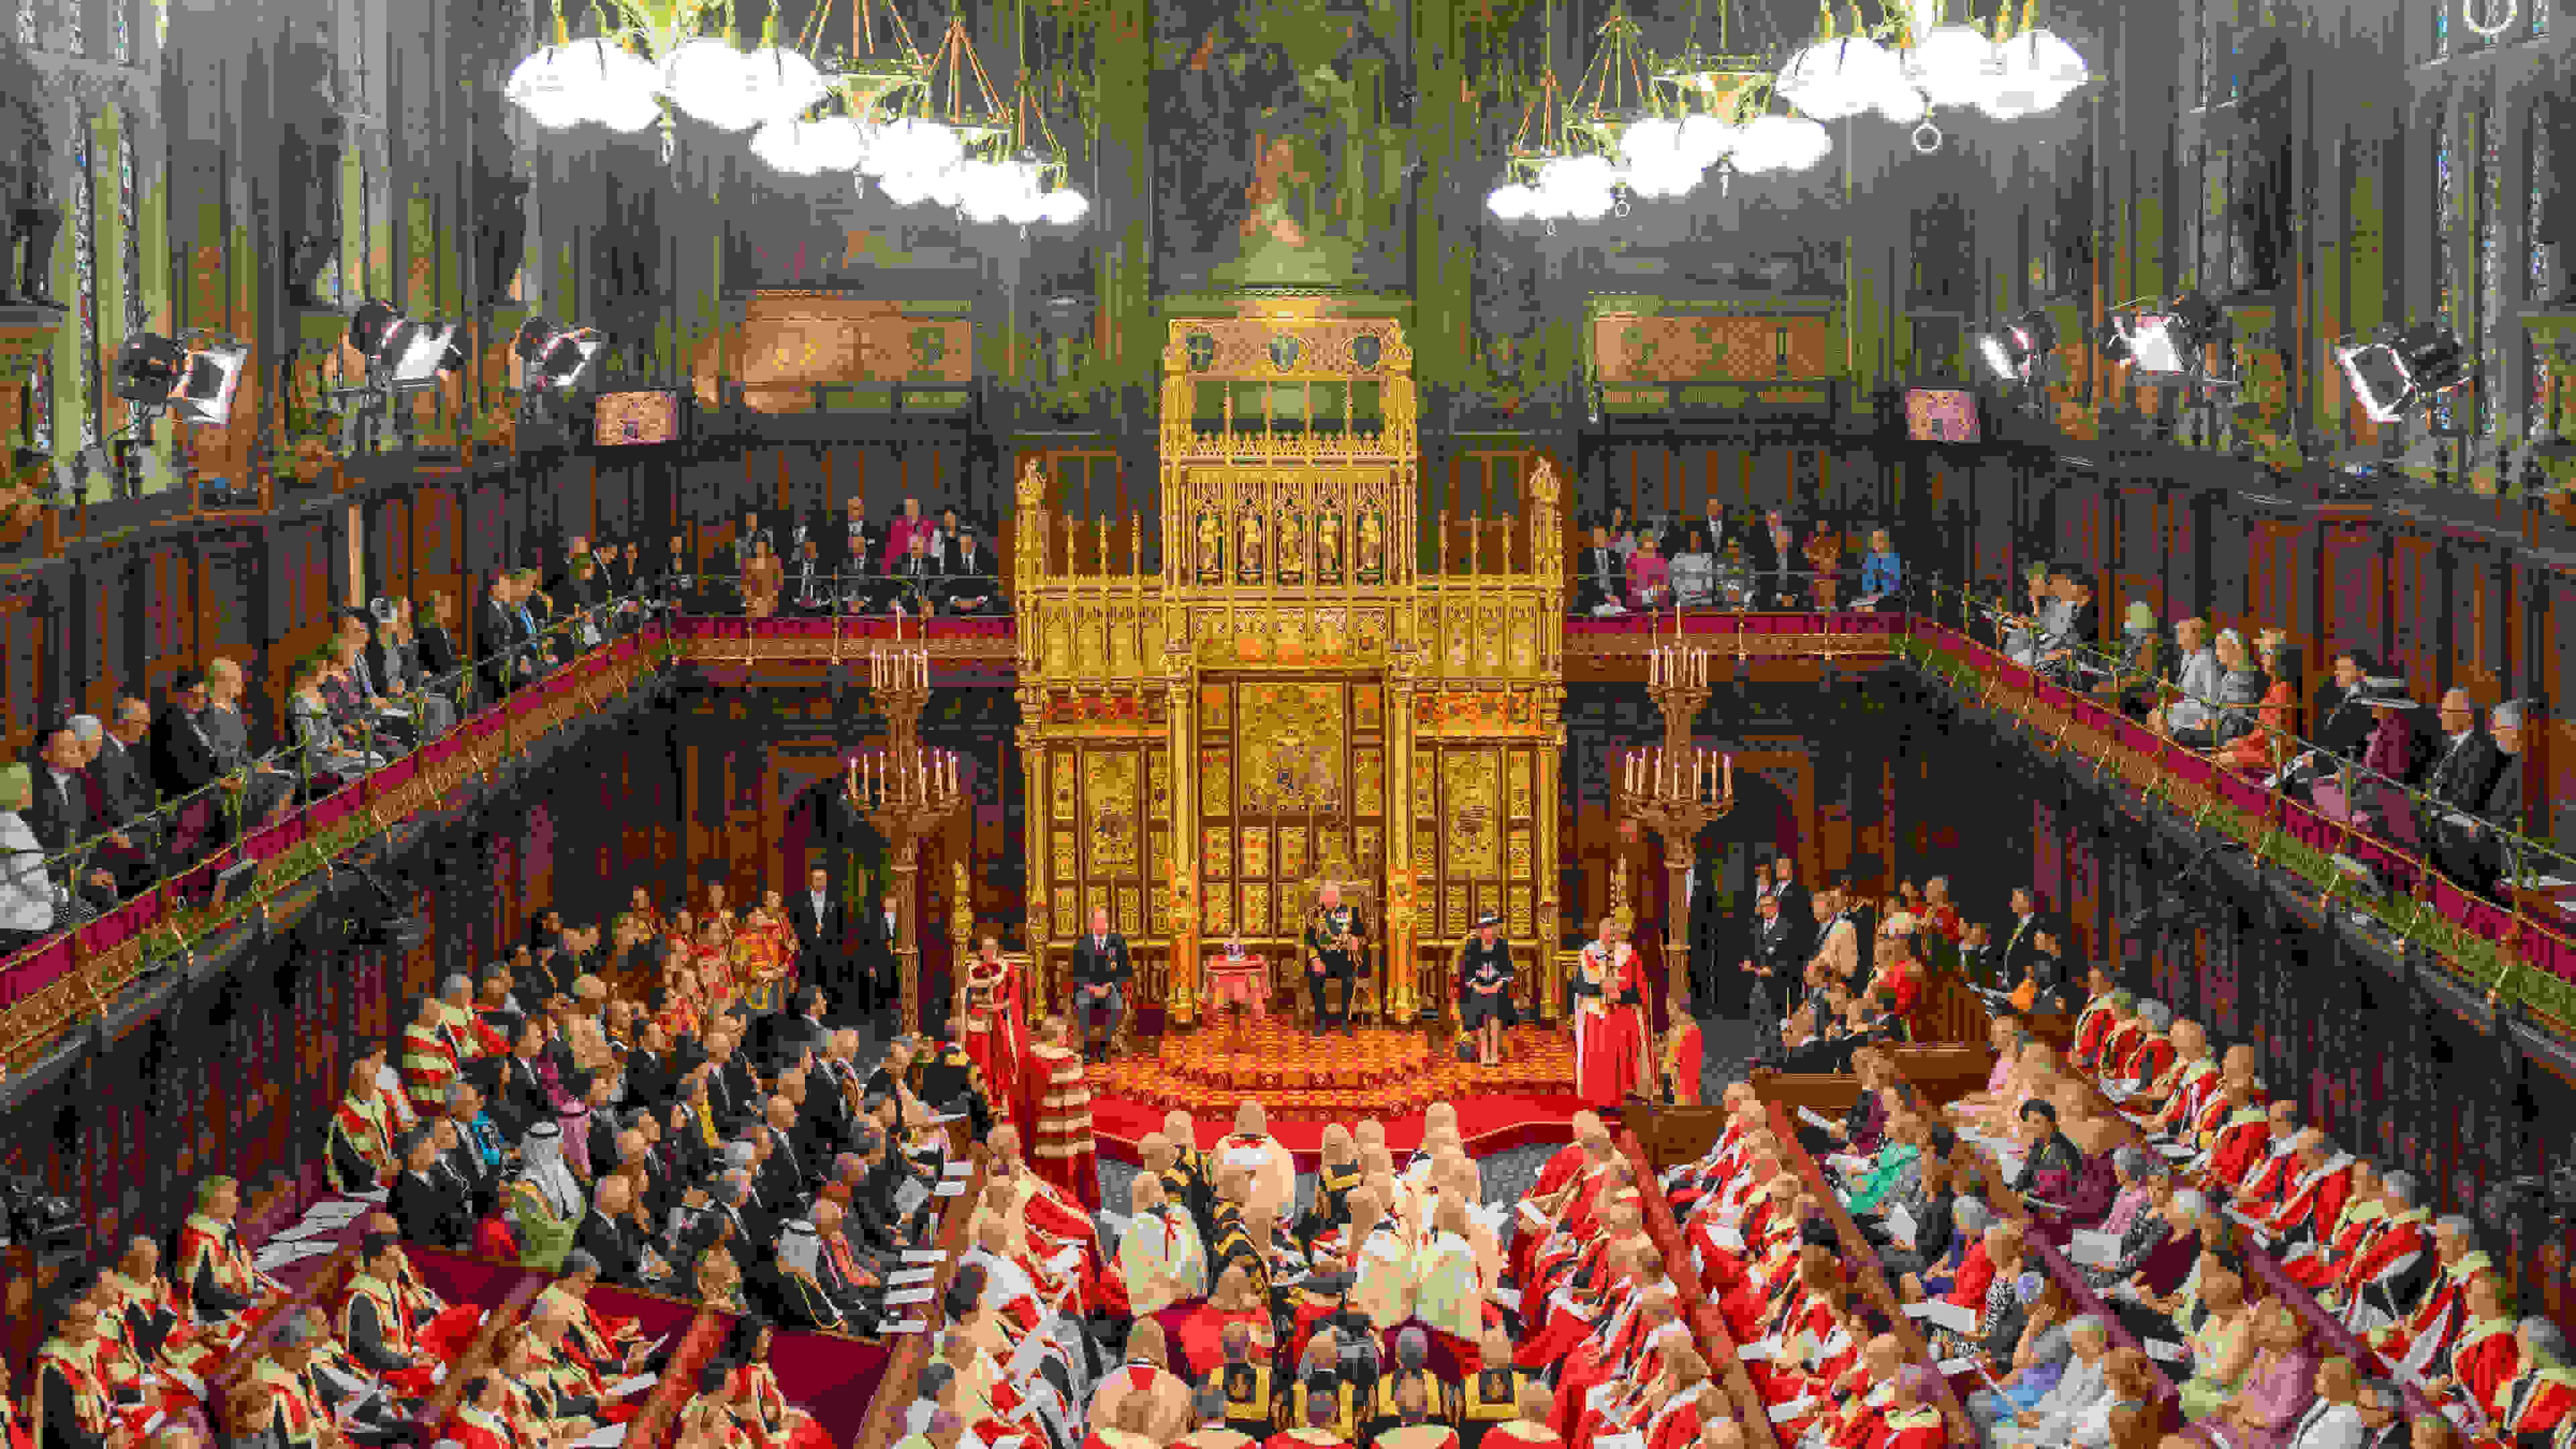 The Queen's Speech delivered by the then Prince of Wales during the May 2022 State Opening of Parliament. ©UK House of Lords (CC BY 2.0)